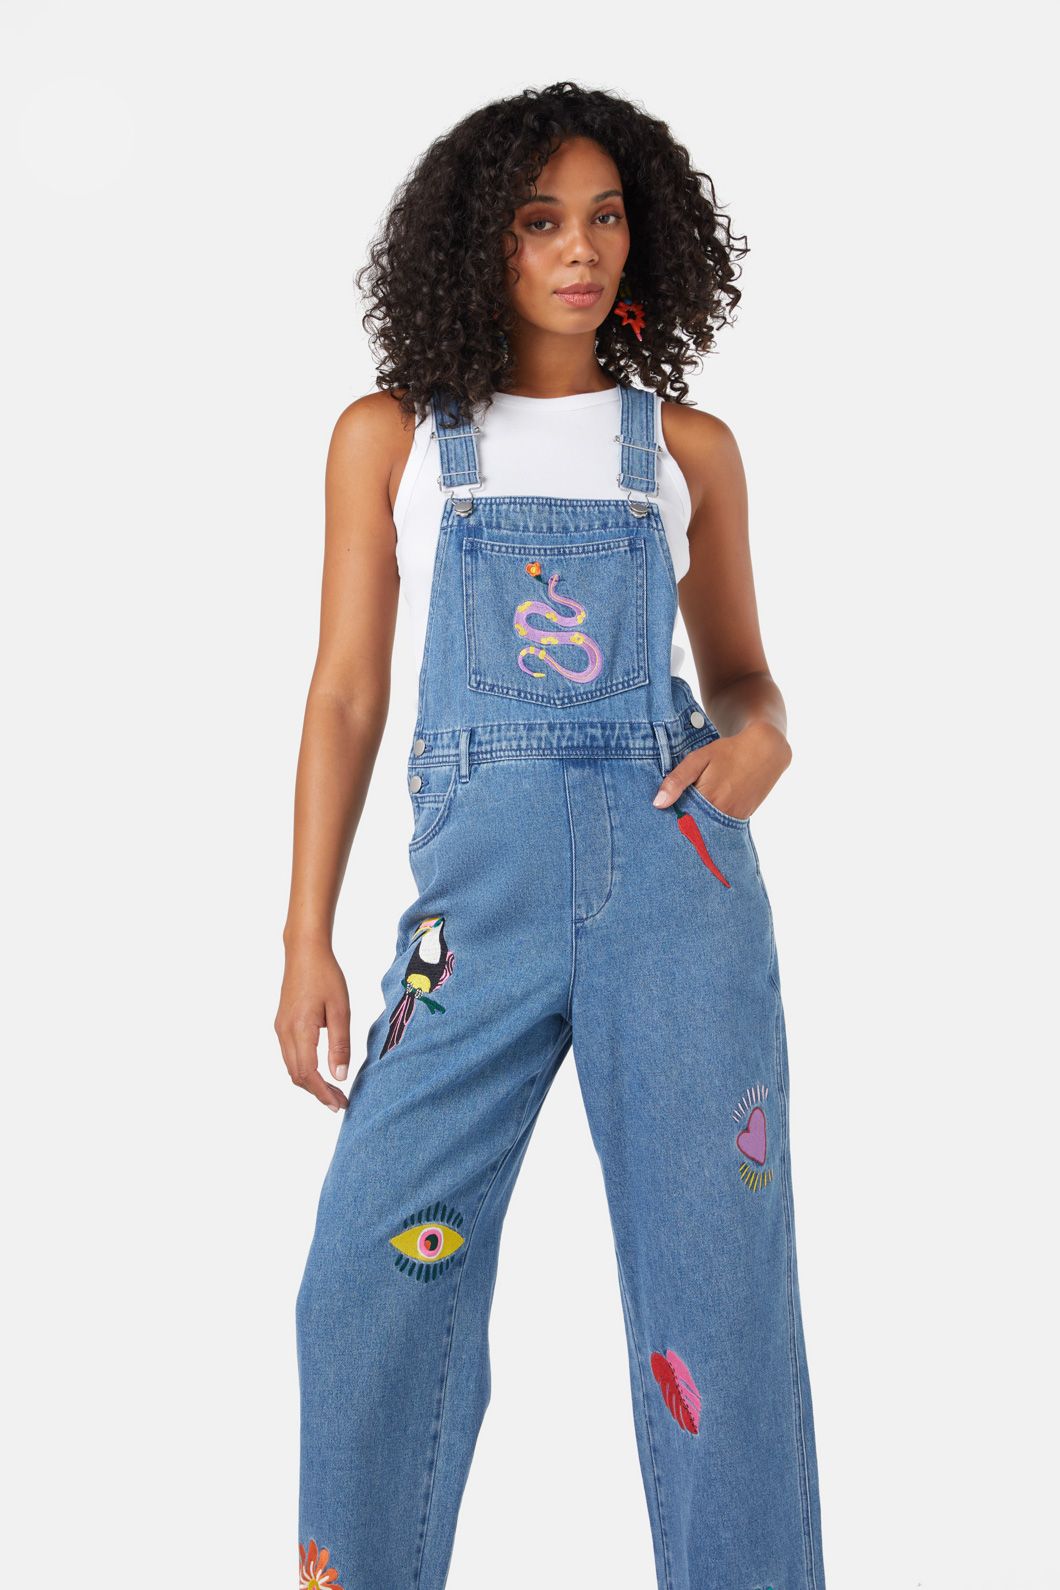 Shop Womens Overalls & Pinafores Online - Fast Shipping & Easy Returns -  City Beach Australia